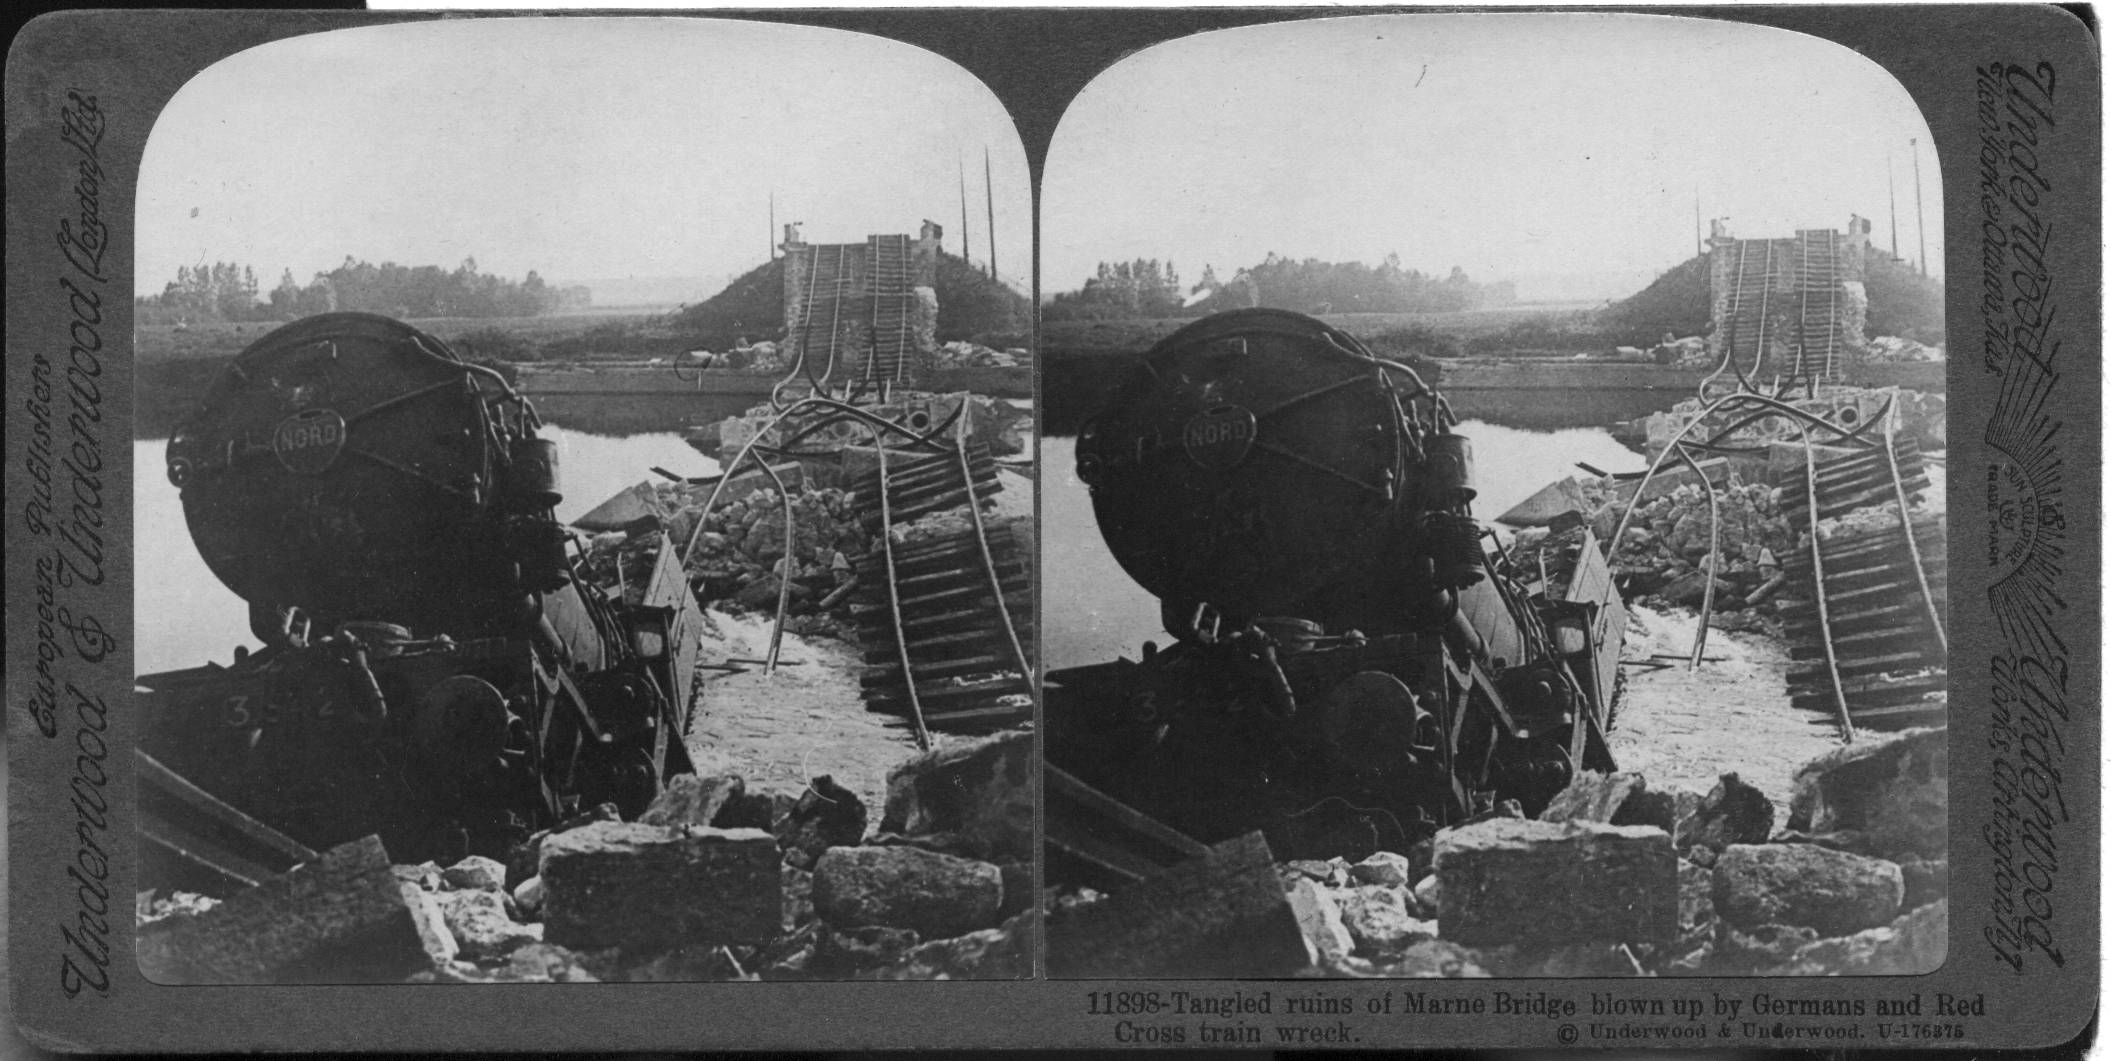 Tangled ruins of Marne Bridge blown up by Germans and Red Cross train wreck